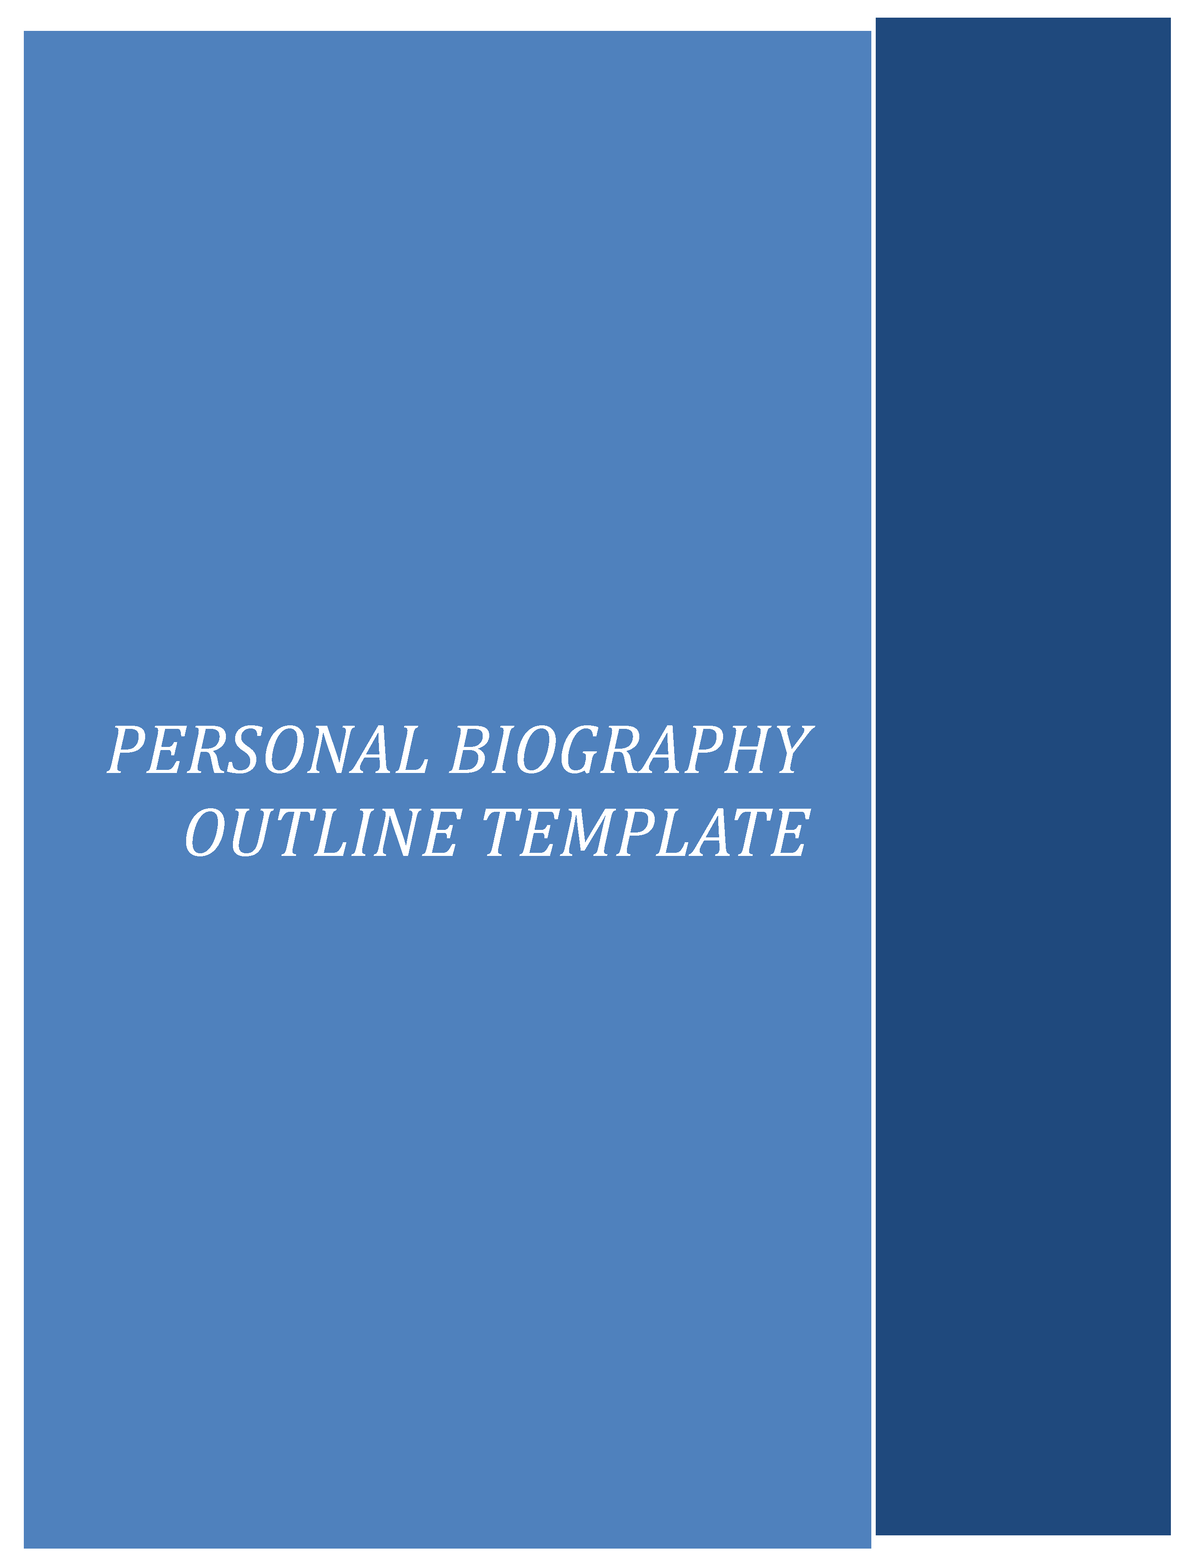 personal biography outline